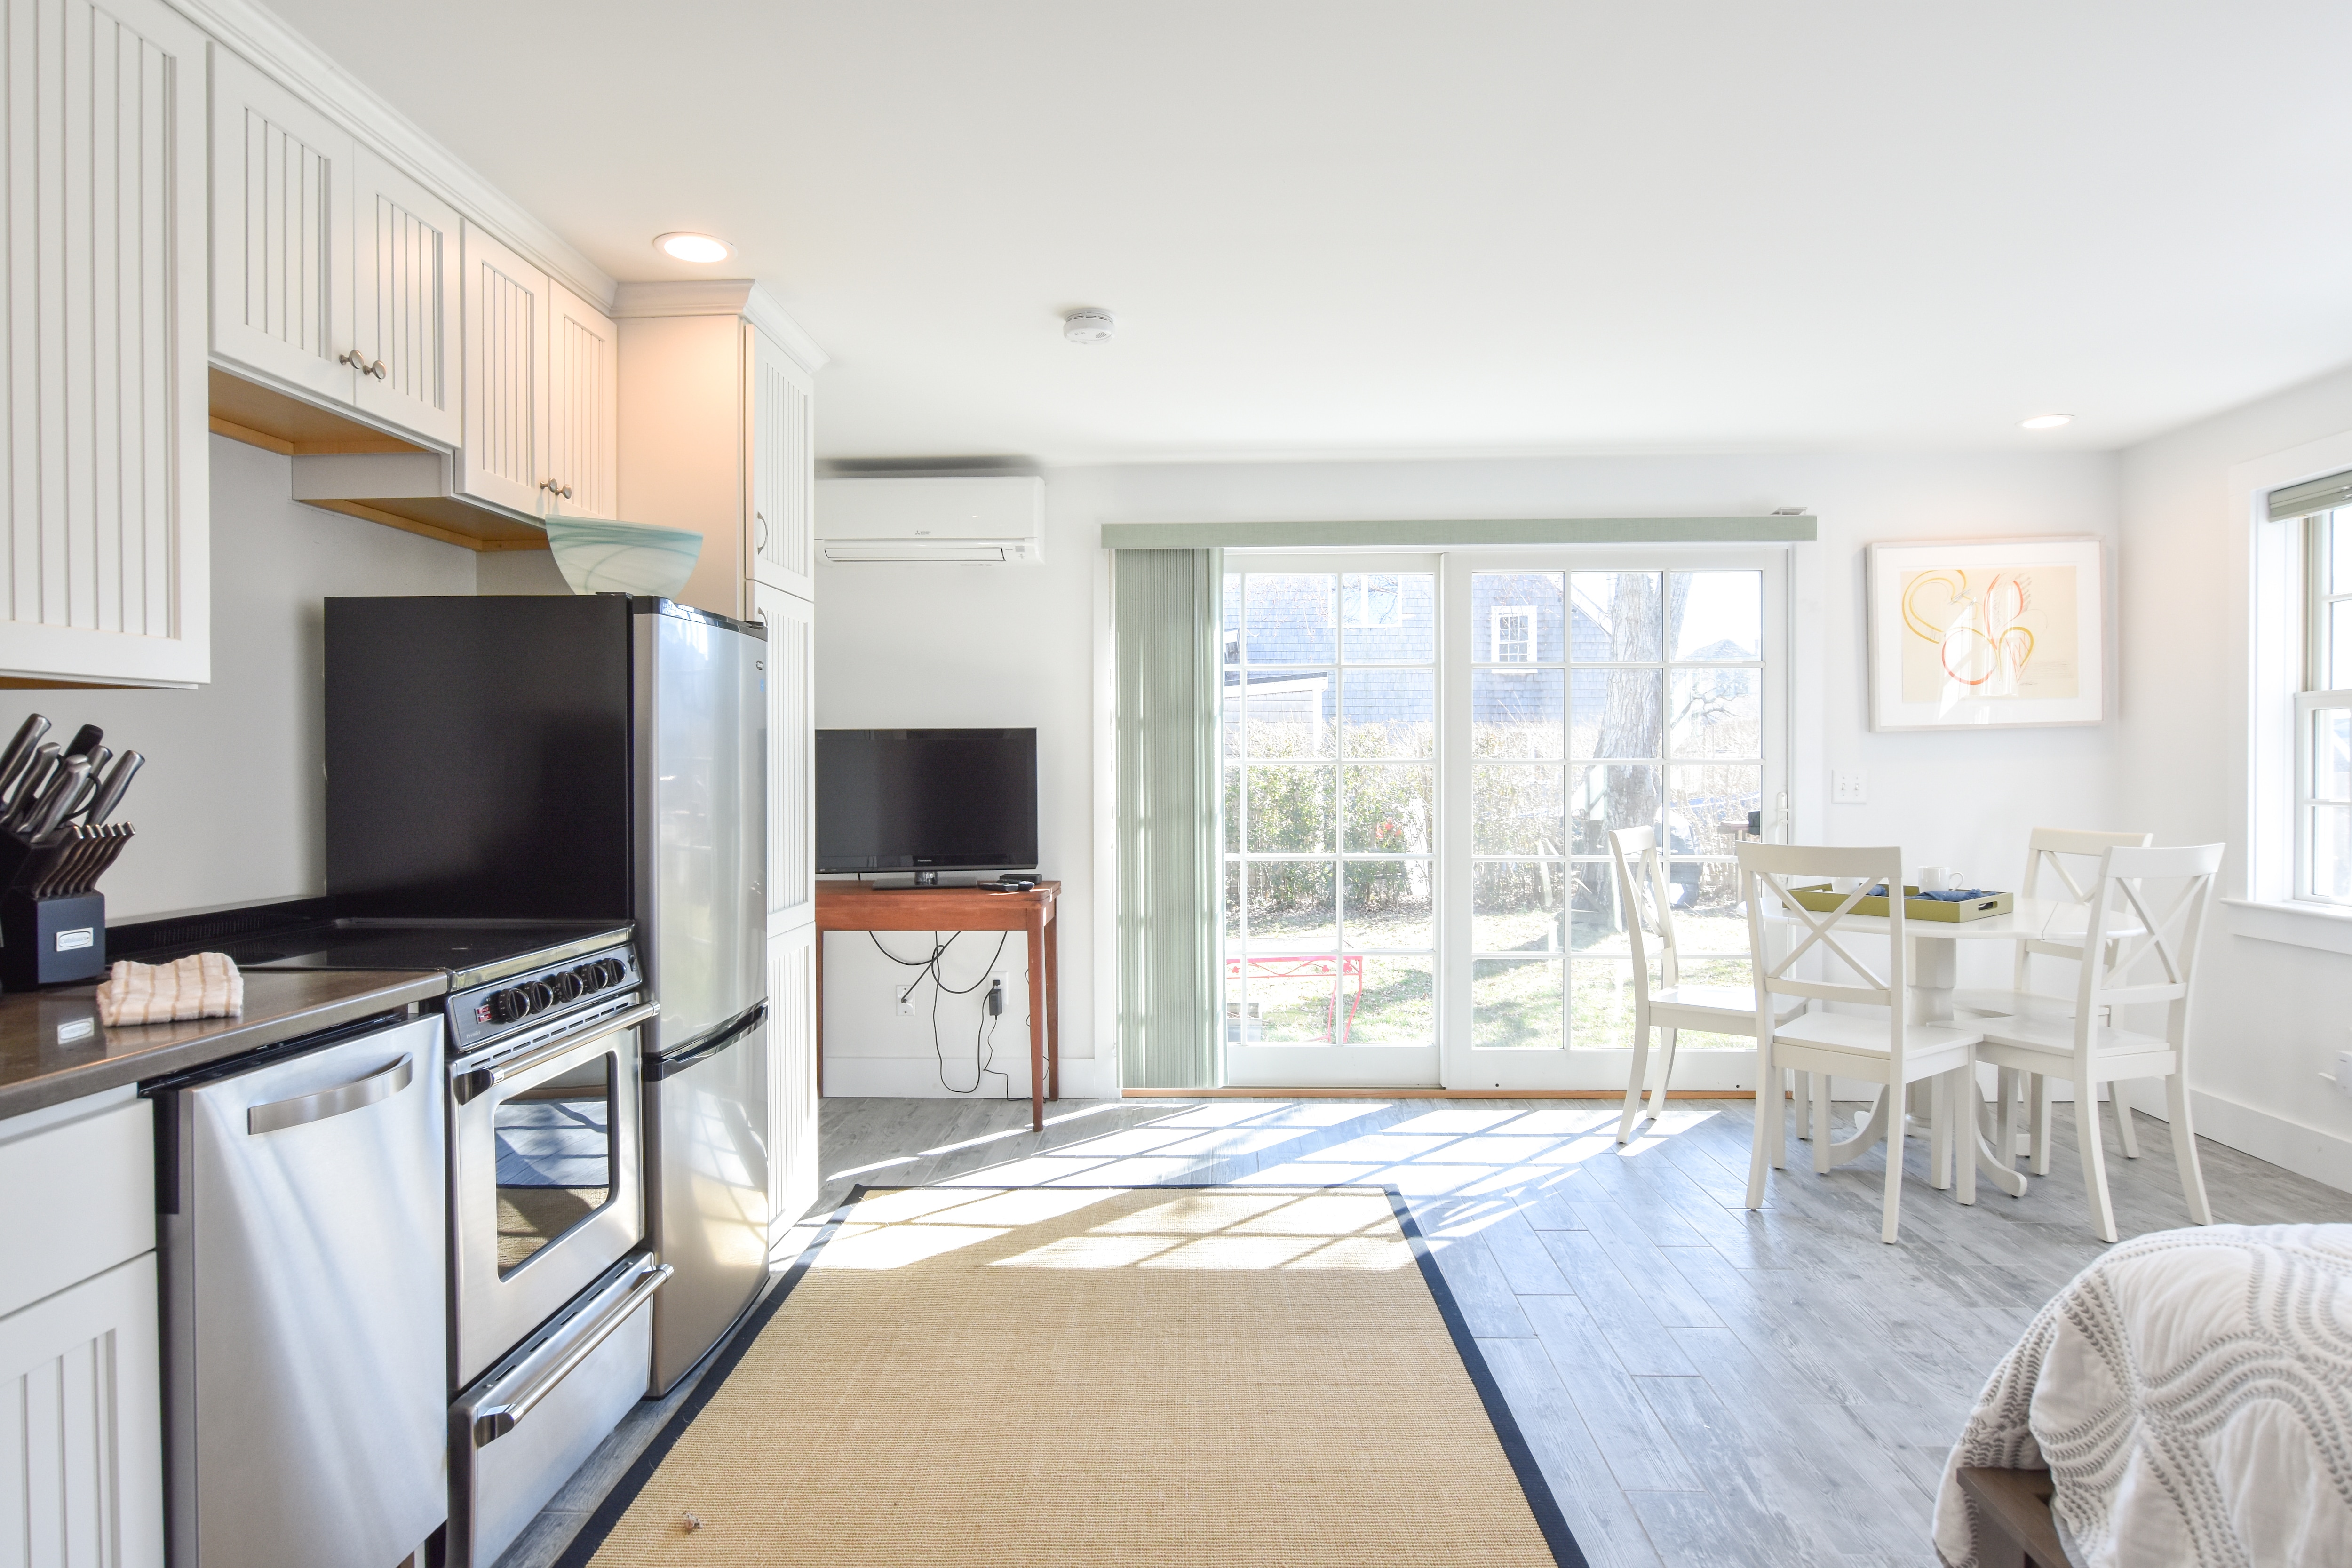 Property Image 1 - 11153: Newly Renovated East End Condo w/ Beach Access & Water Views from Roof Deck!